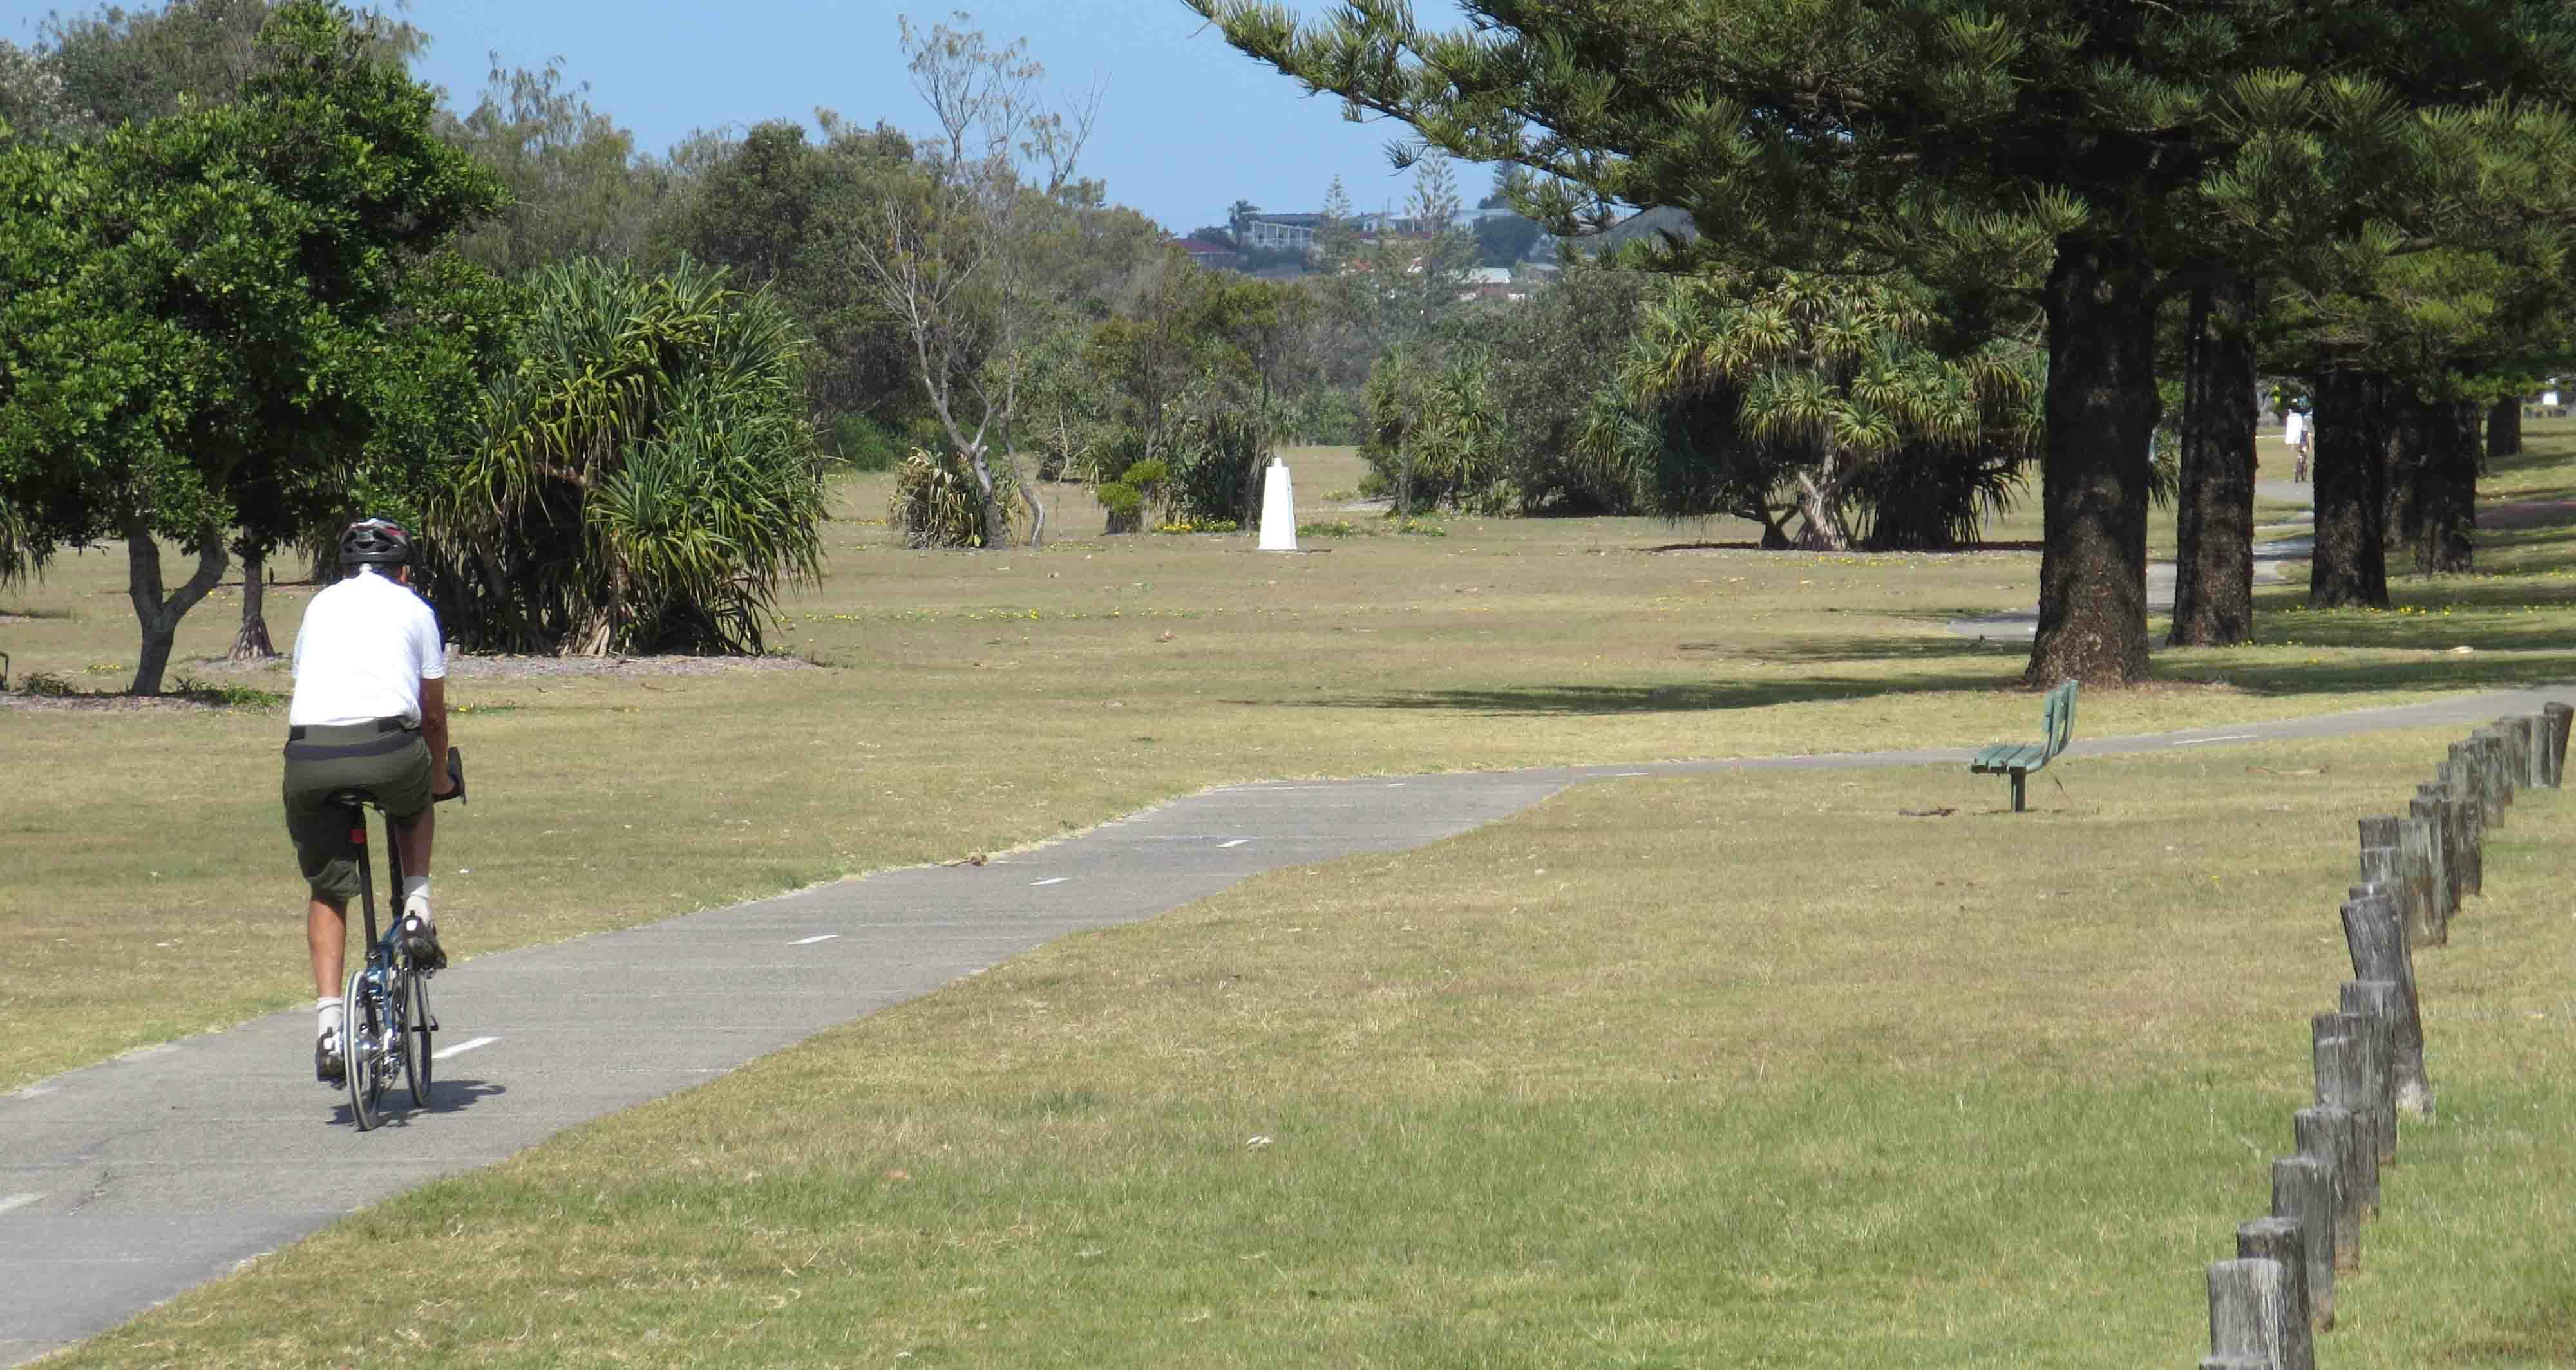 The foreshore bicycle and pedestrian path at Kingscliff. How we spend out recreational time is a vital part of a community's culture.